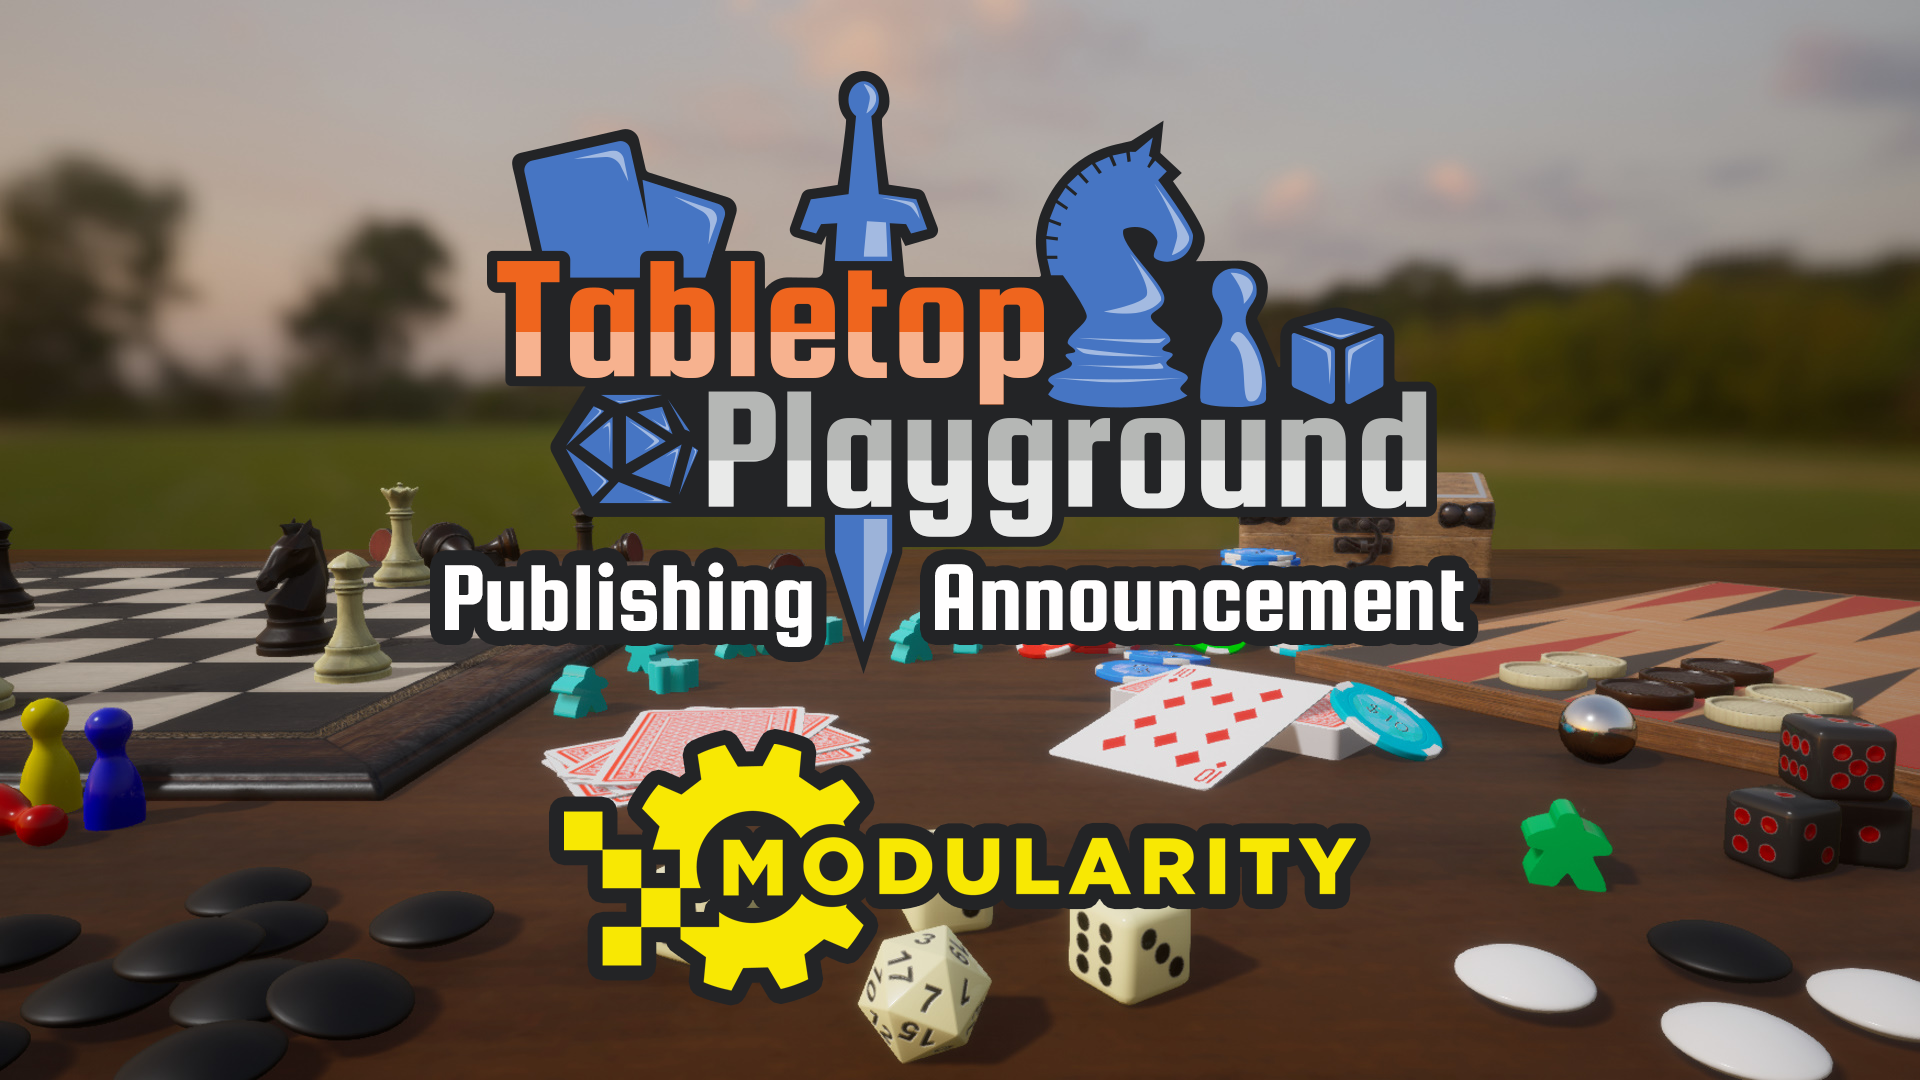 Tabletop Playground download the new